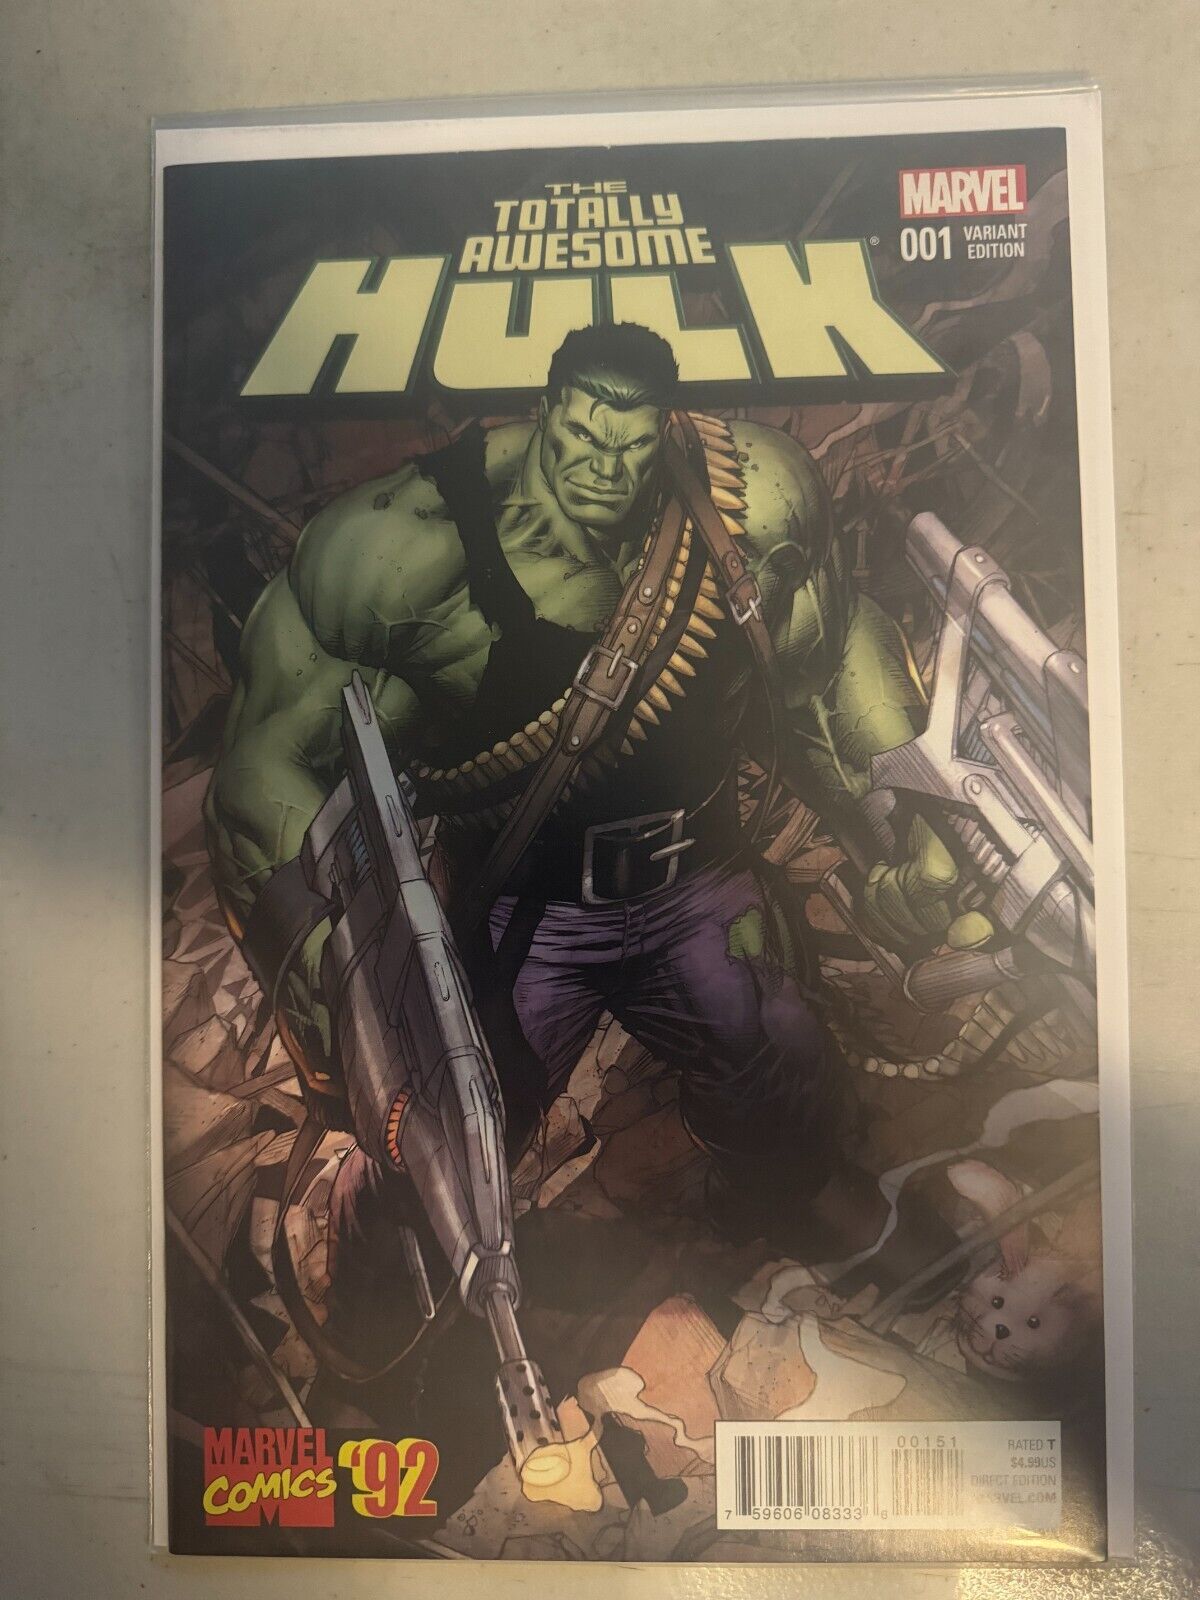 Totally Awesome Hulk #1 - 1/20 Ratio Variant By Dale Keown - Marvel 2016